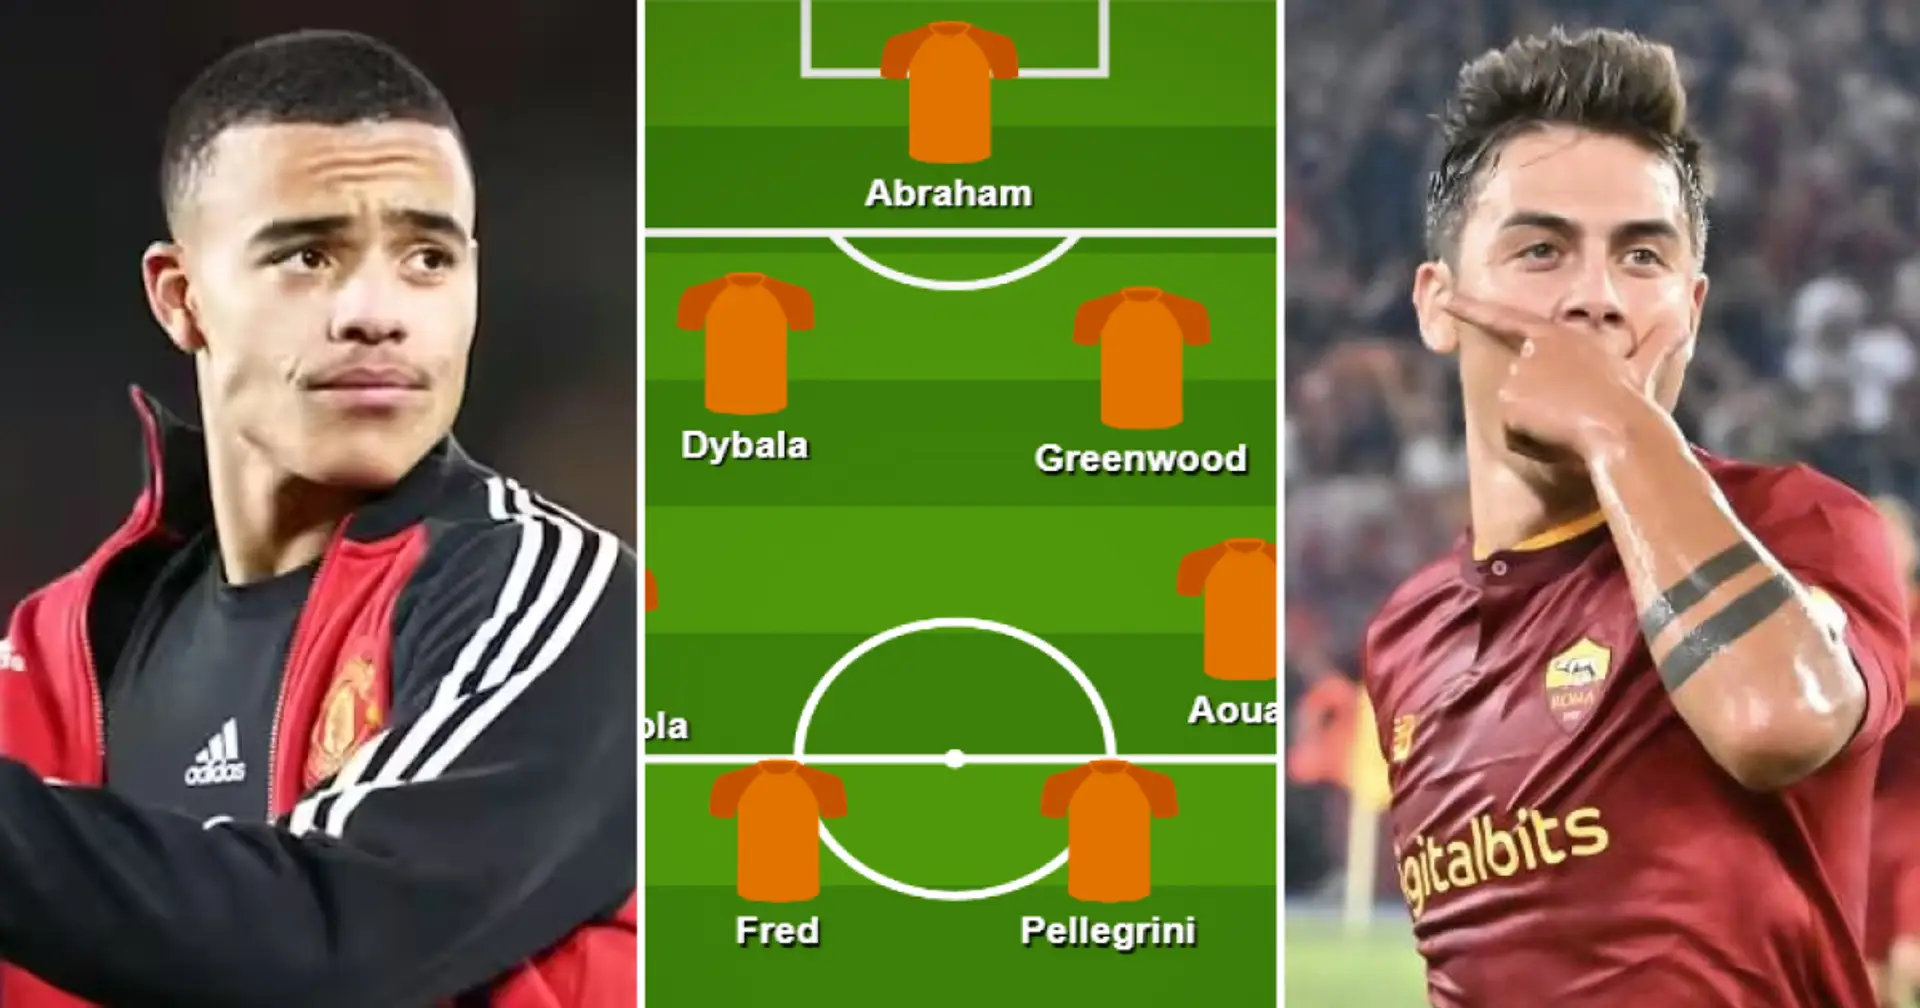 AS Roma's best XI next season with Greenwood in and Dybala staying shown in line up